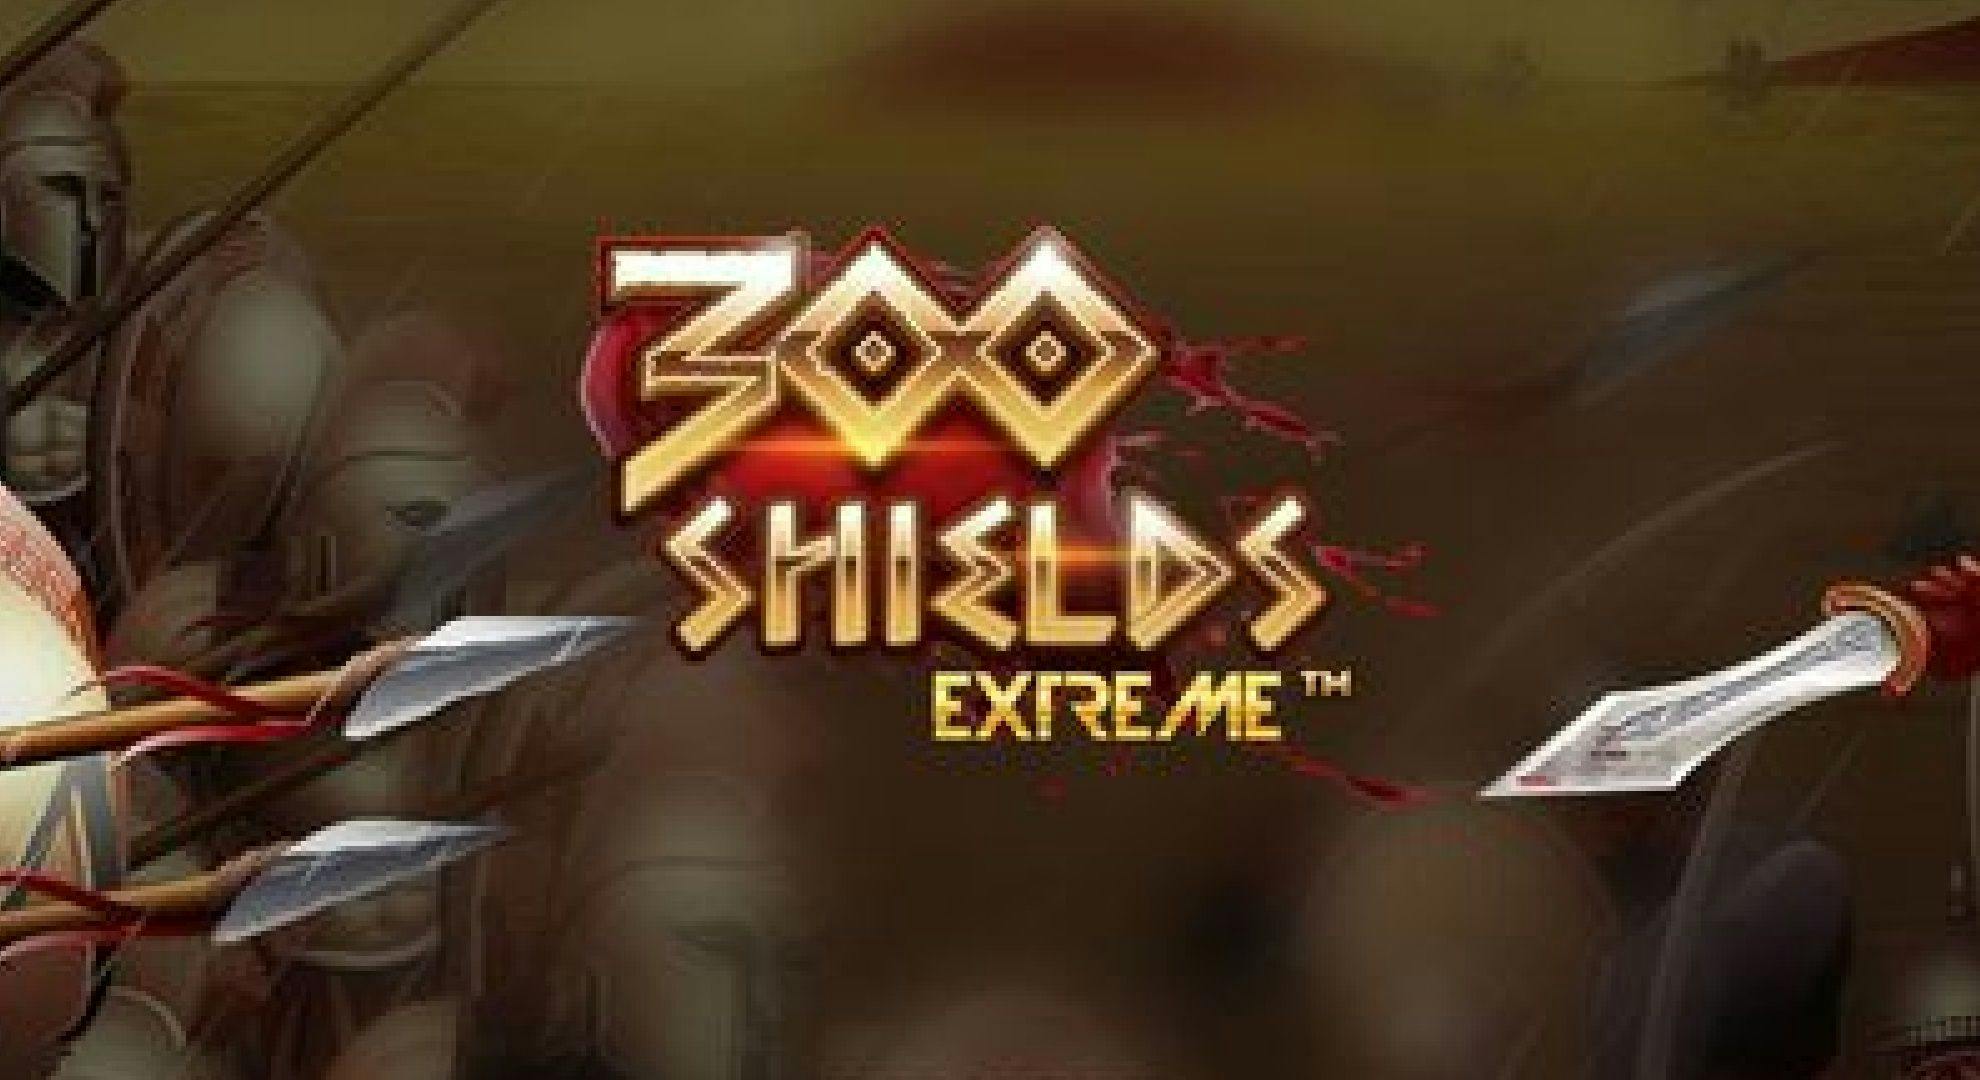 300 Shields Extreme Slot Online Free Play